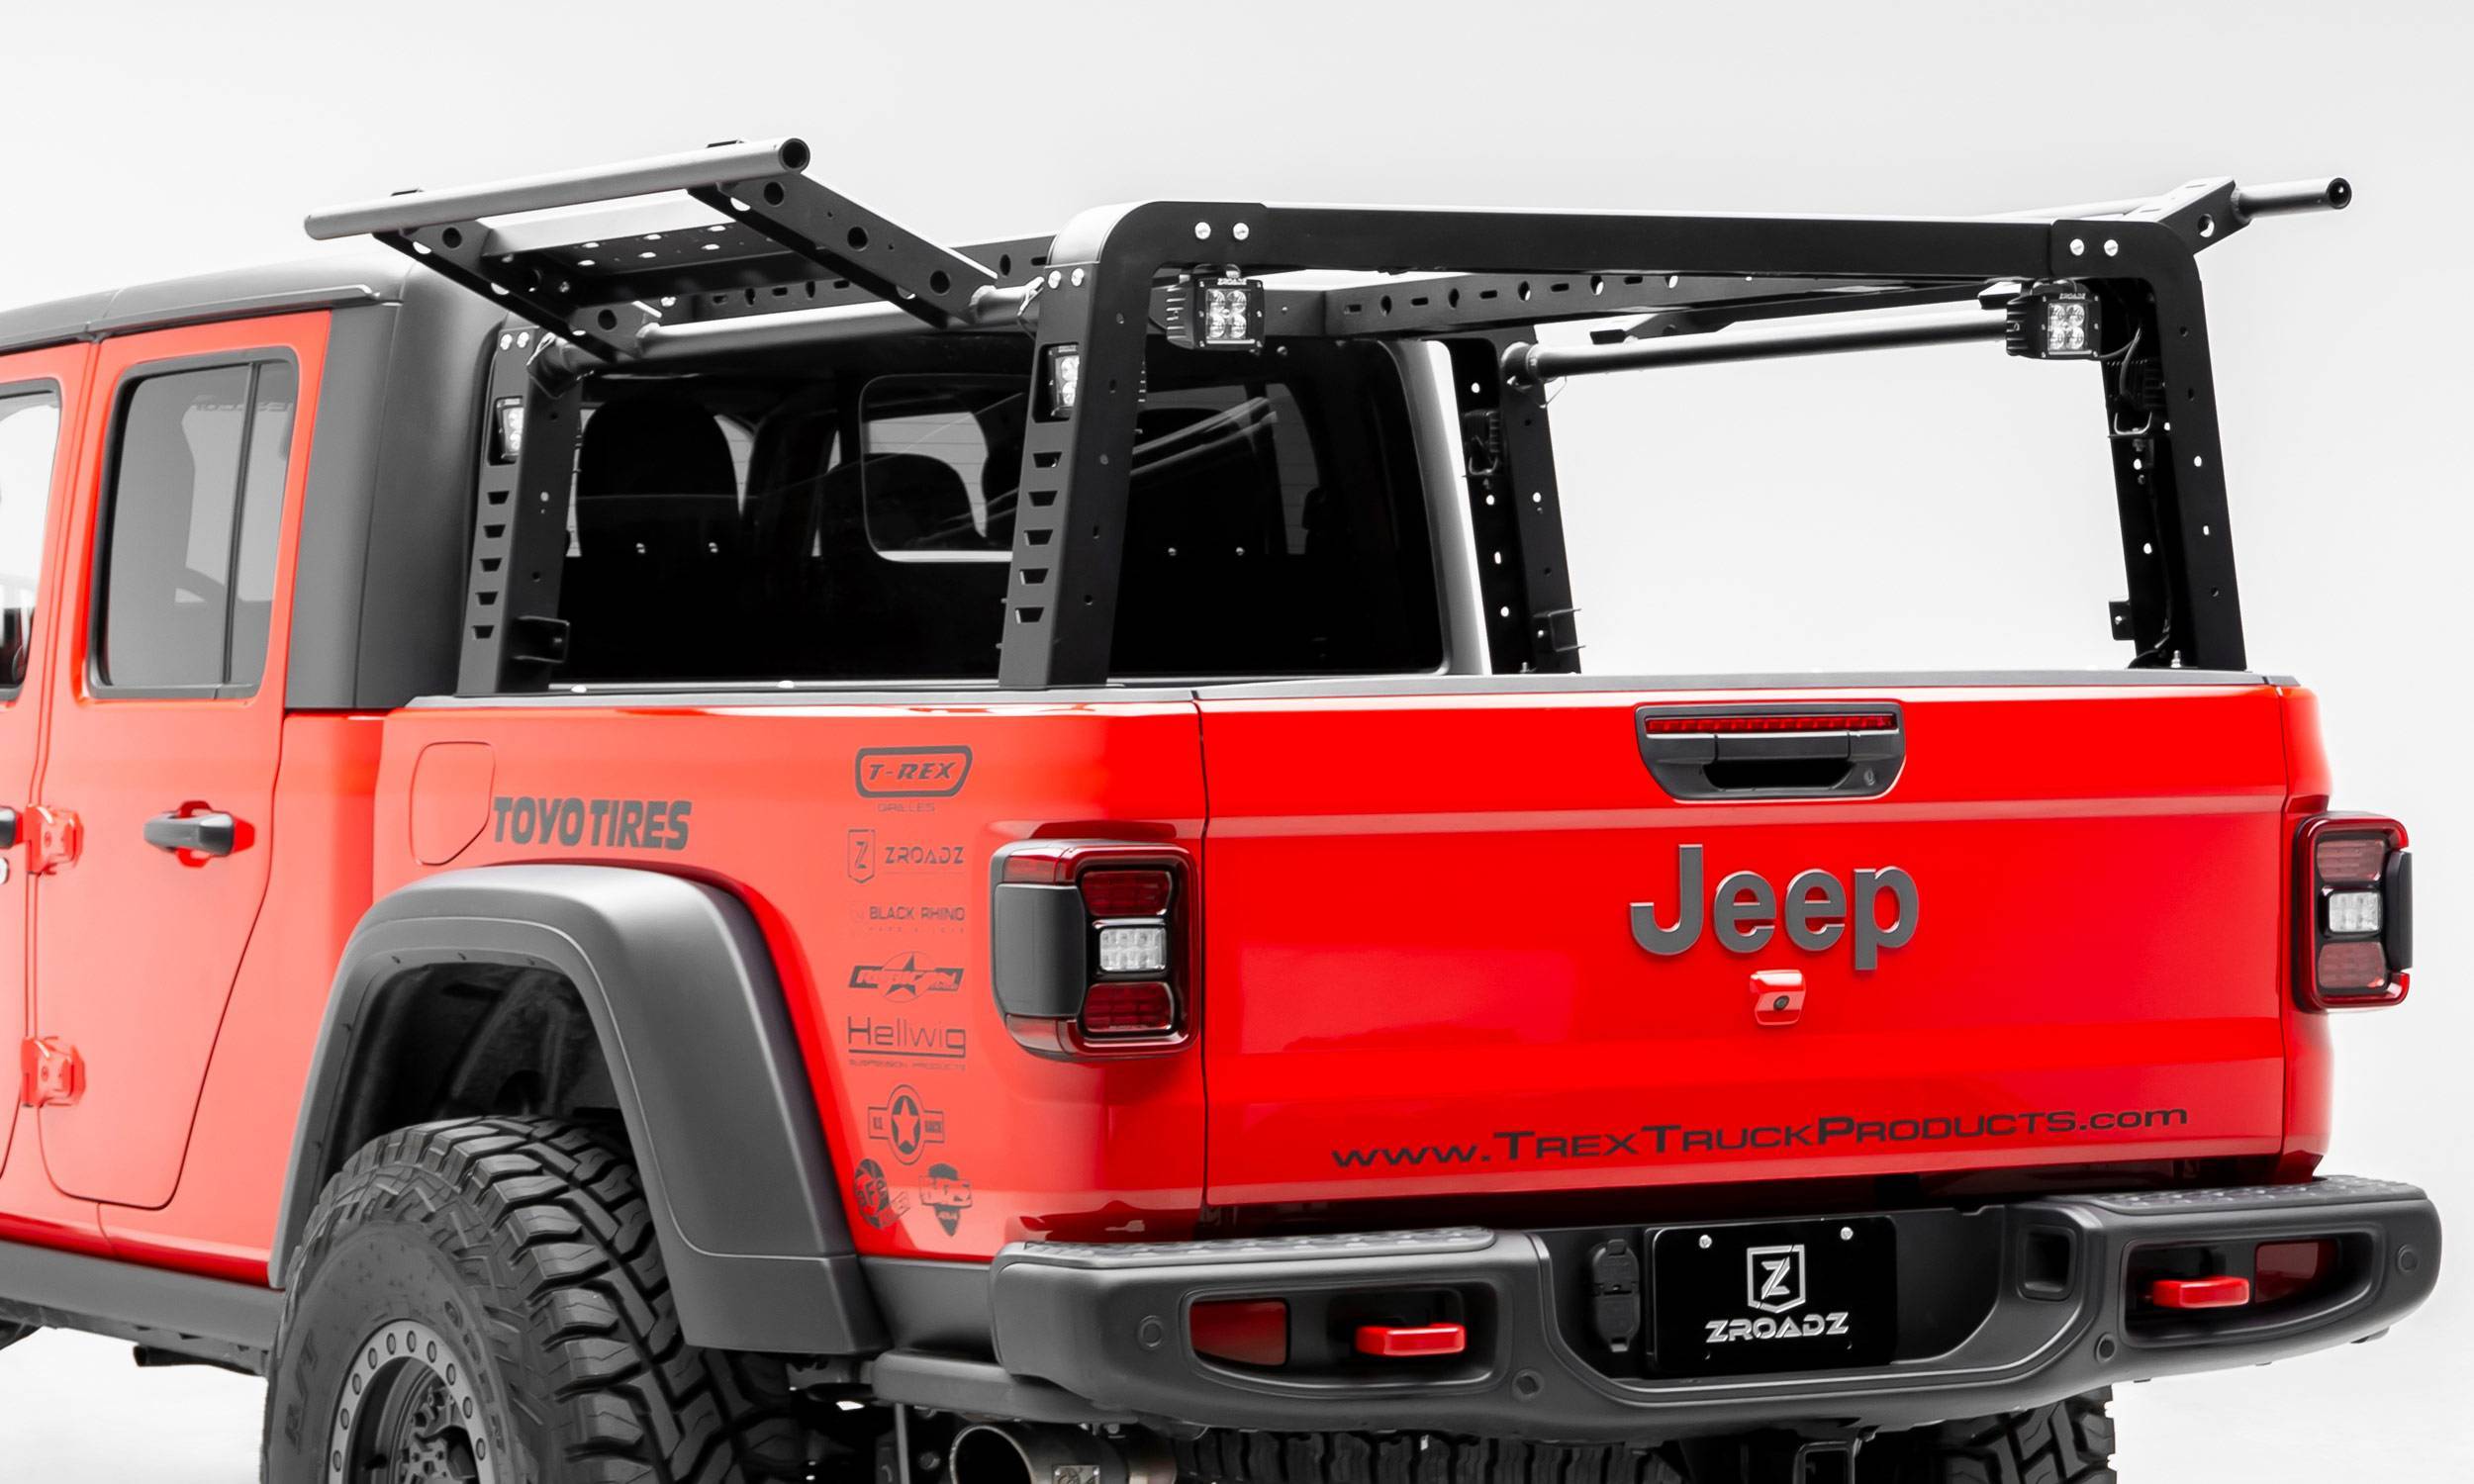 ZROADZ OFF ROAD PRODUCTS - 2019-2022 Jeep Gladiator Access Overland Rack With Two Lifting Side Gates, For use on Factory Trail Rail Cargo Systems - Part # Z834111